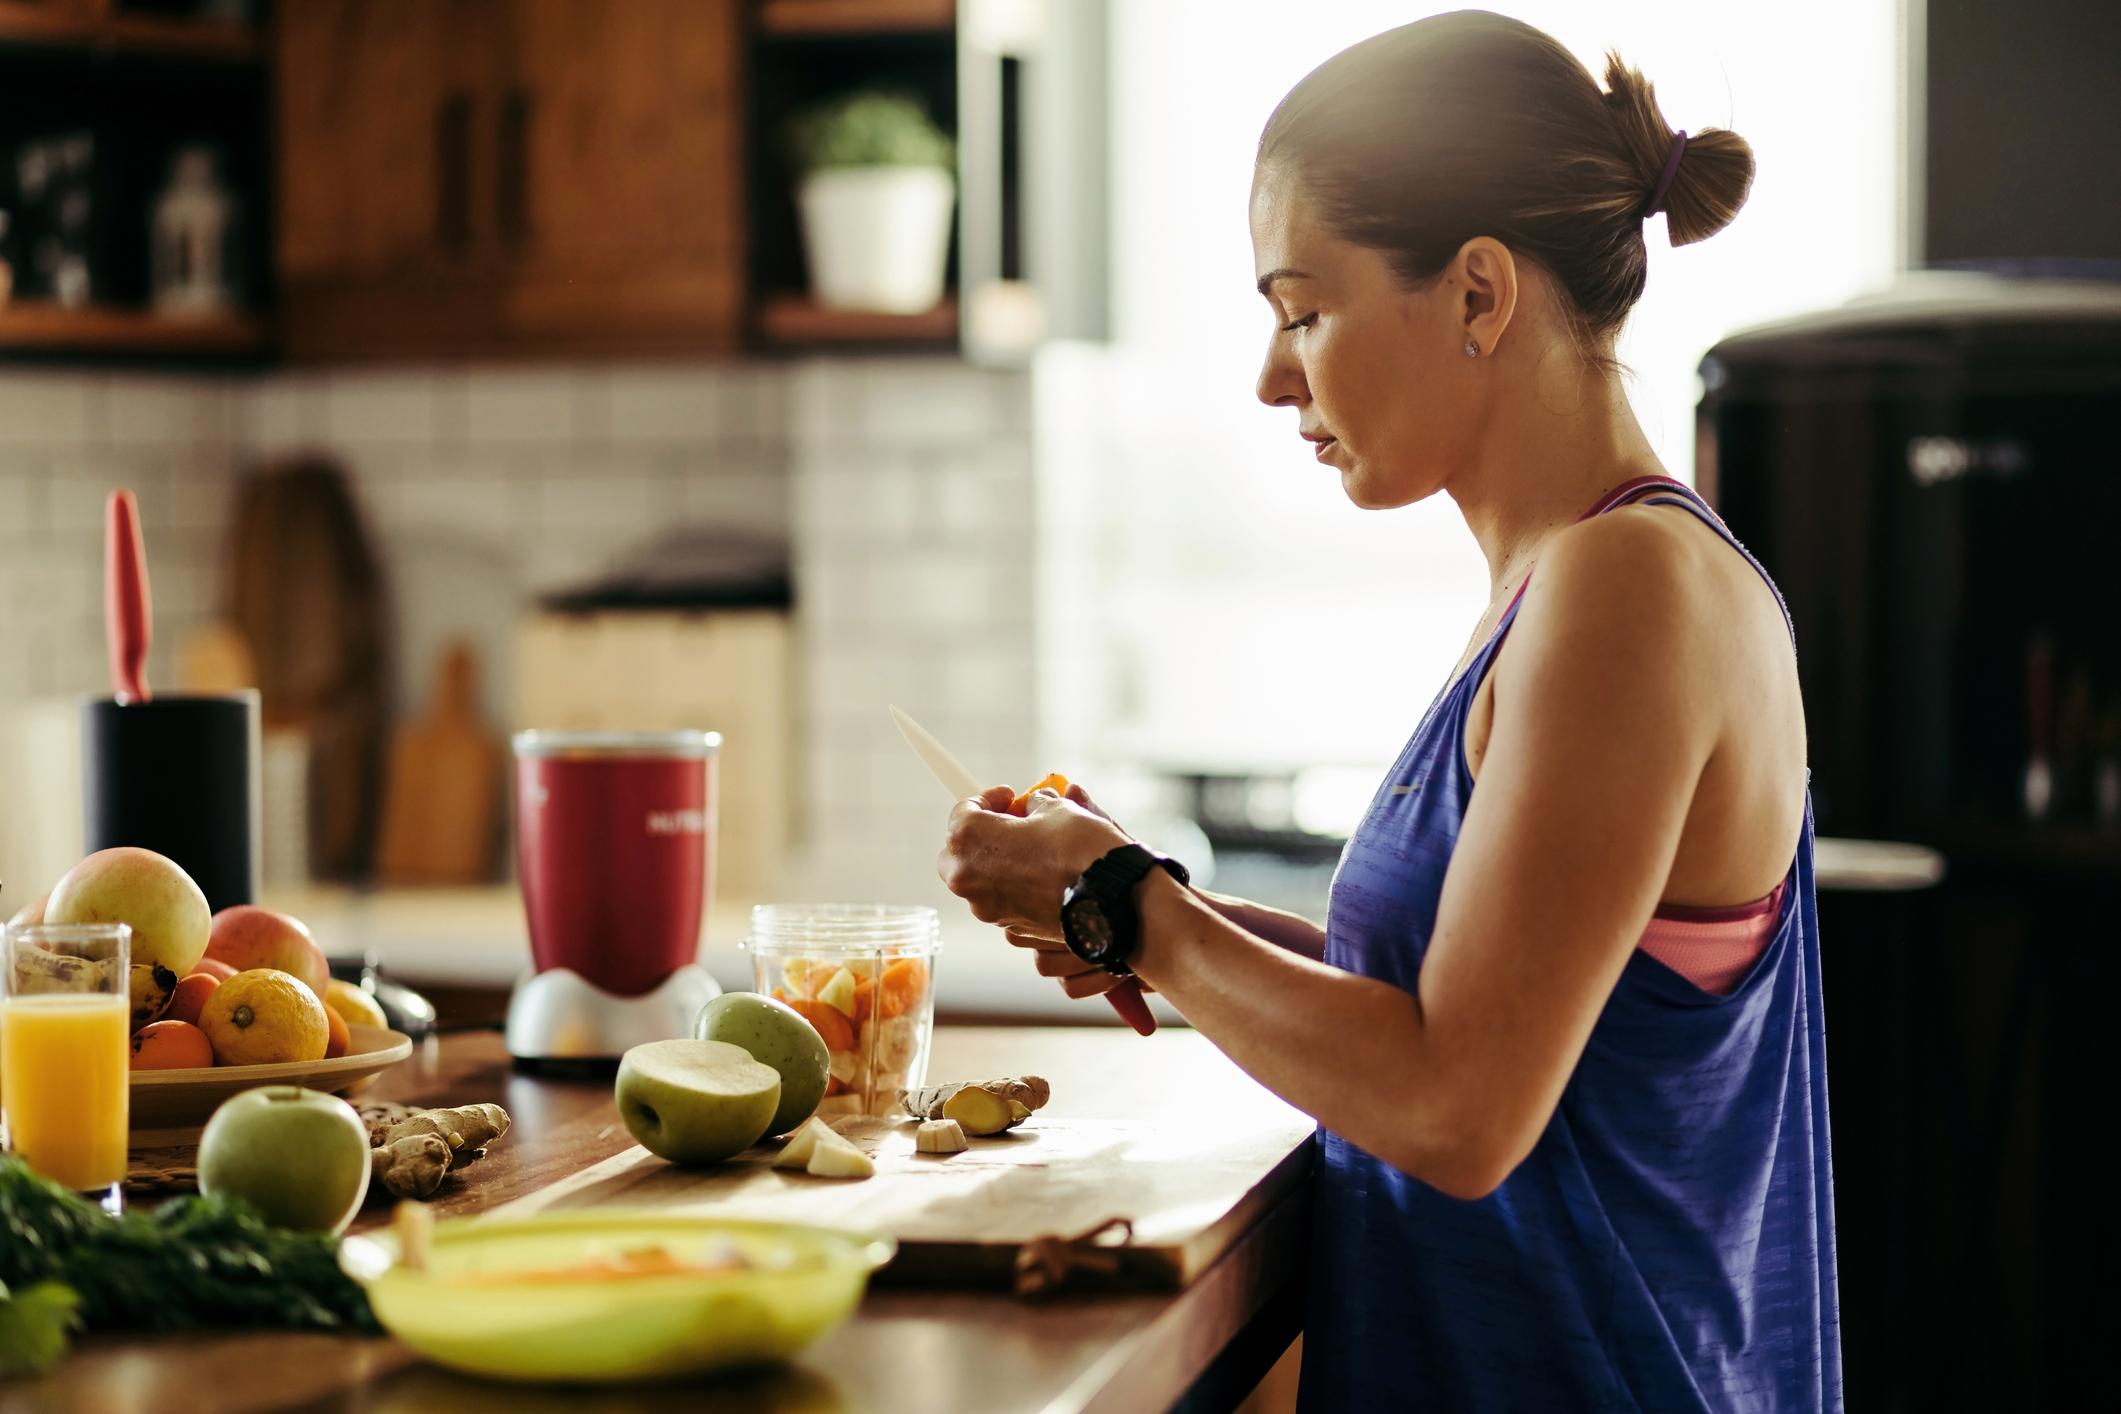 woman in athletic clothing standing at a kitchen counter cutting up fresh fruit for a smoothie